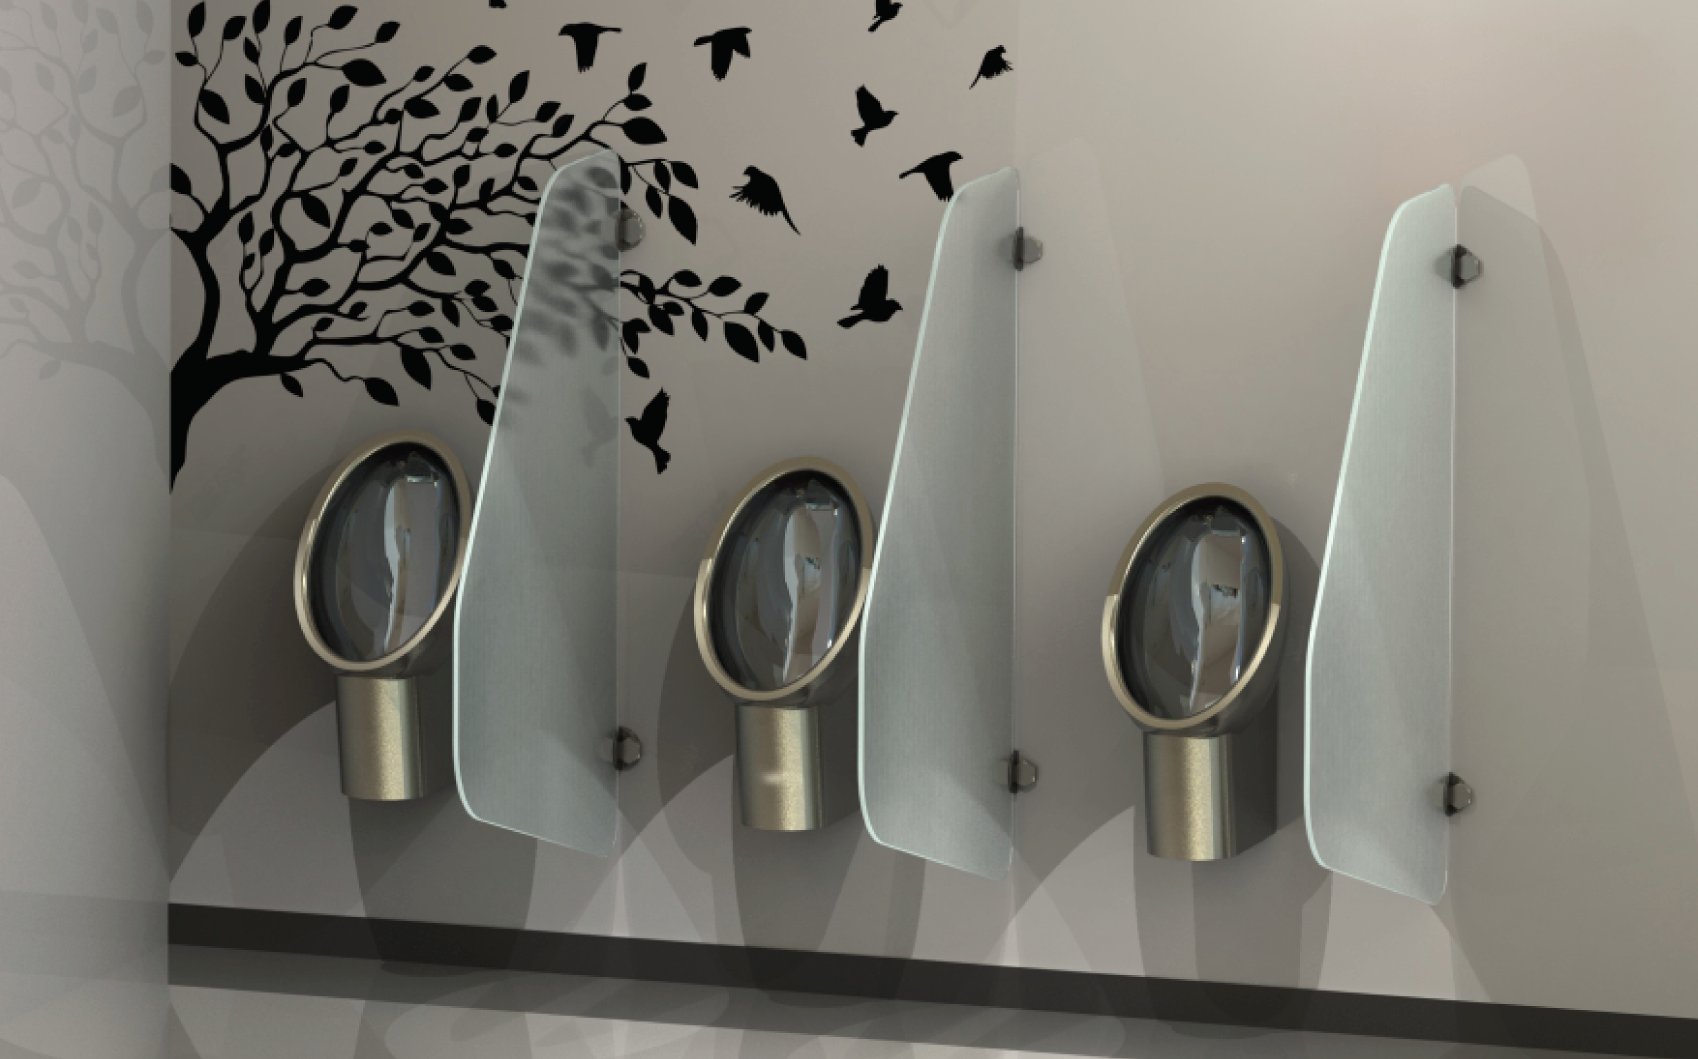 Stainless steel urinals from Stainless AD installed on a wall with bird designs